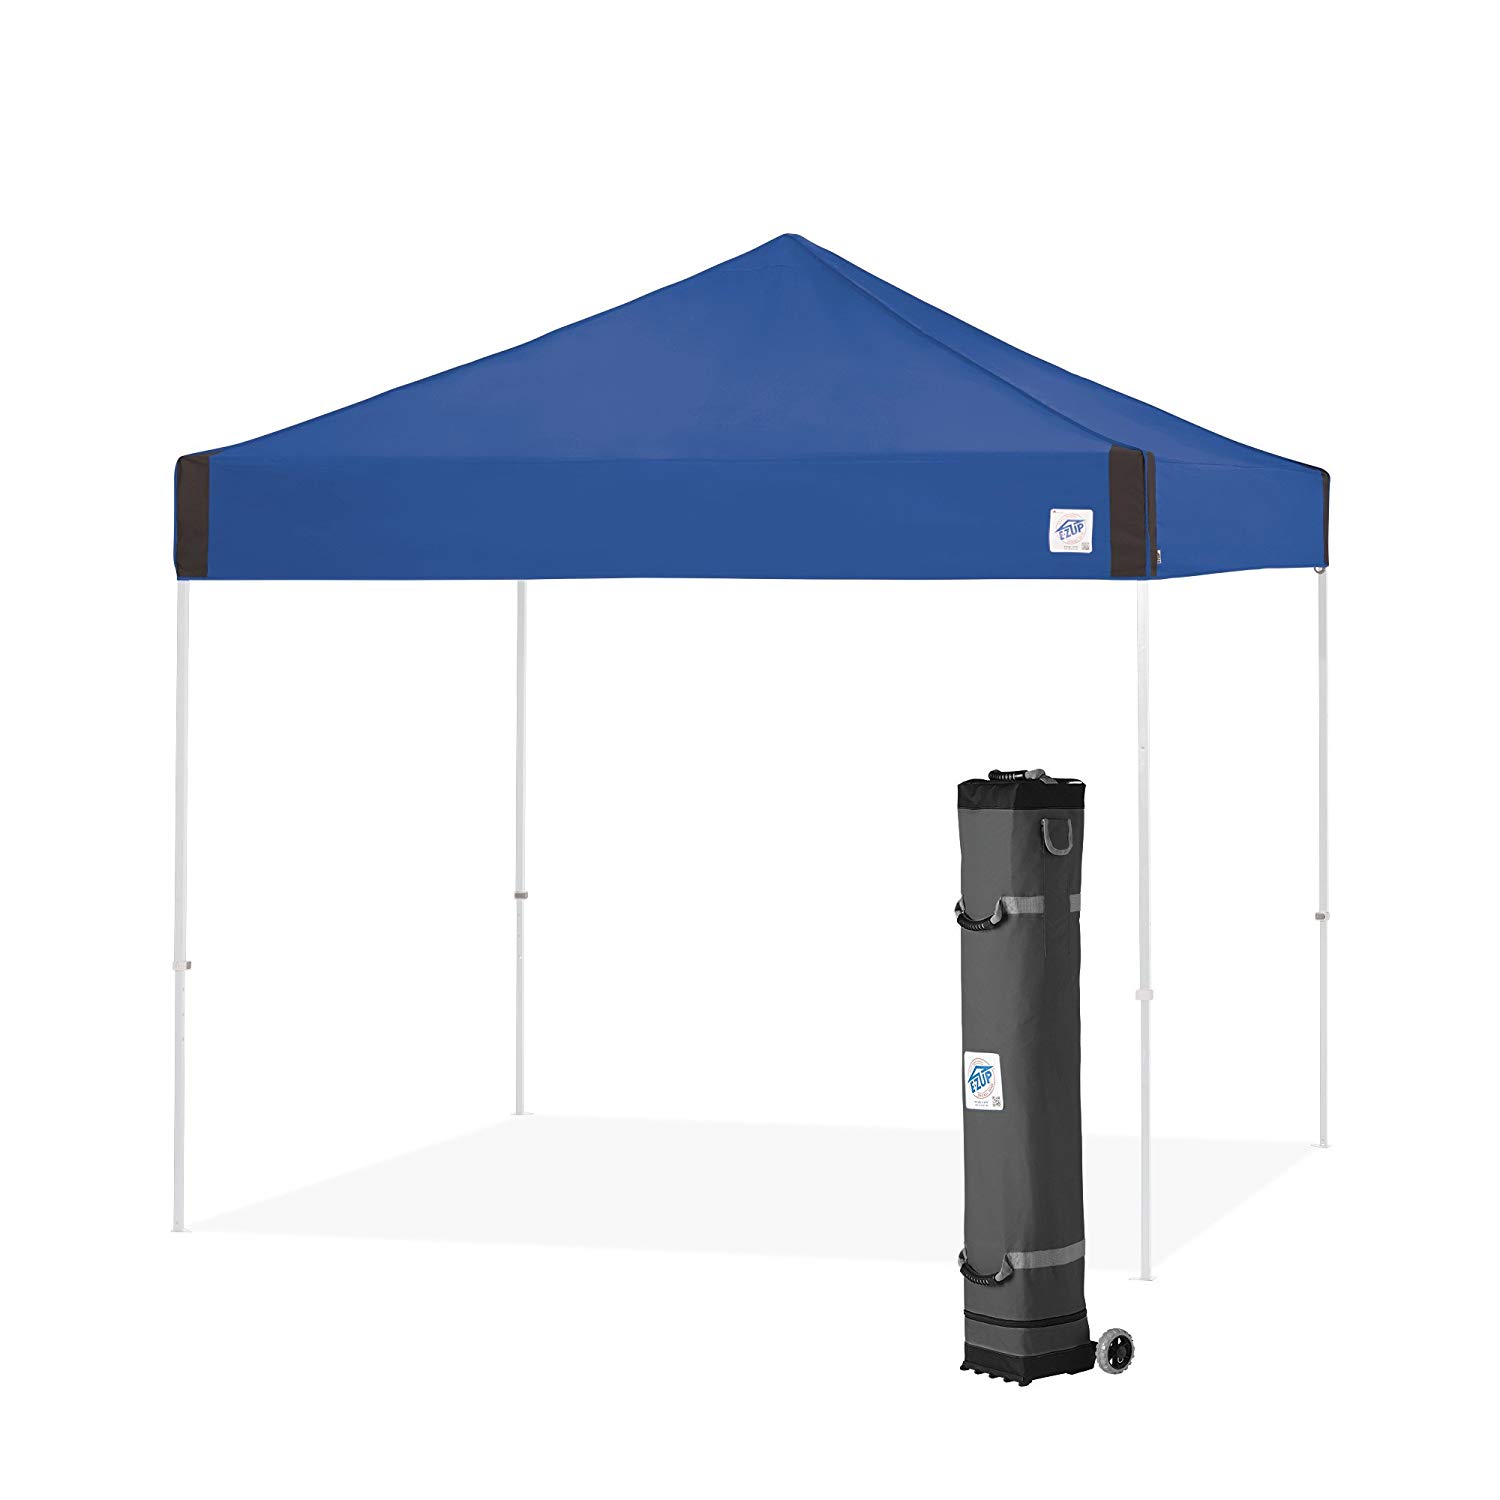 E-Z UP Portable Instant Canopy Pop-Up Tent, 10×10-Feet